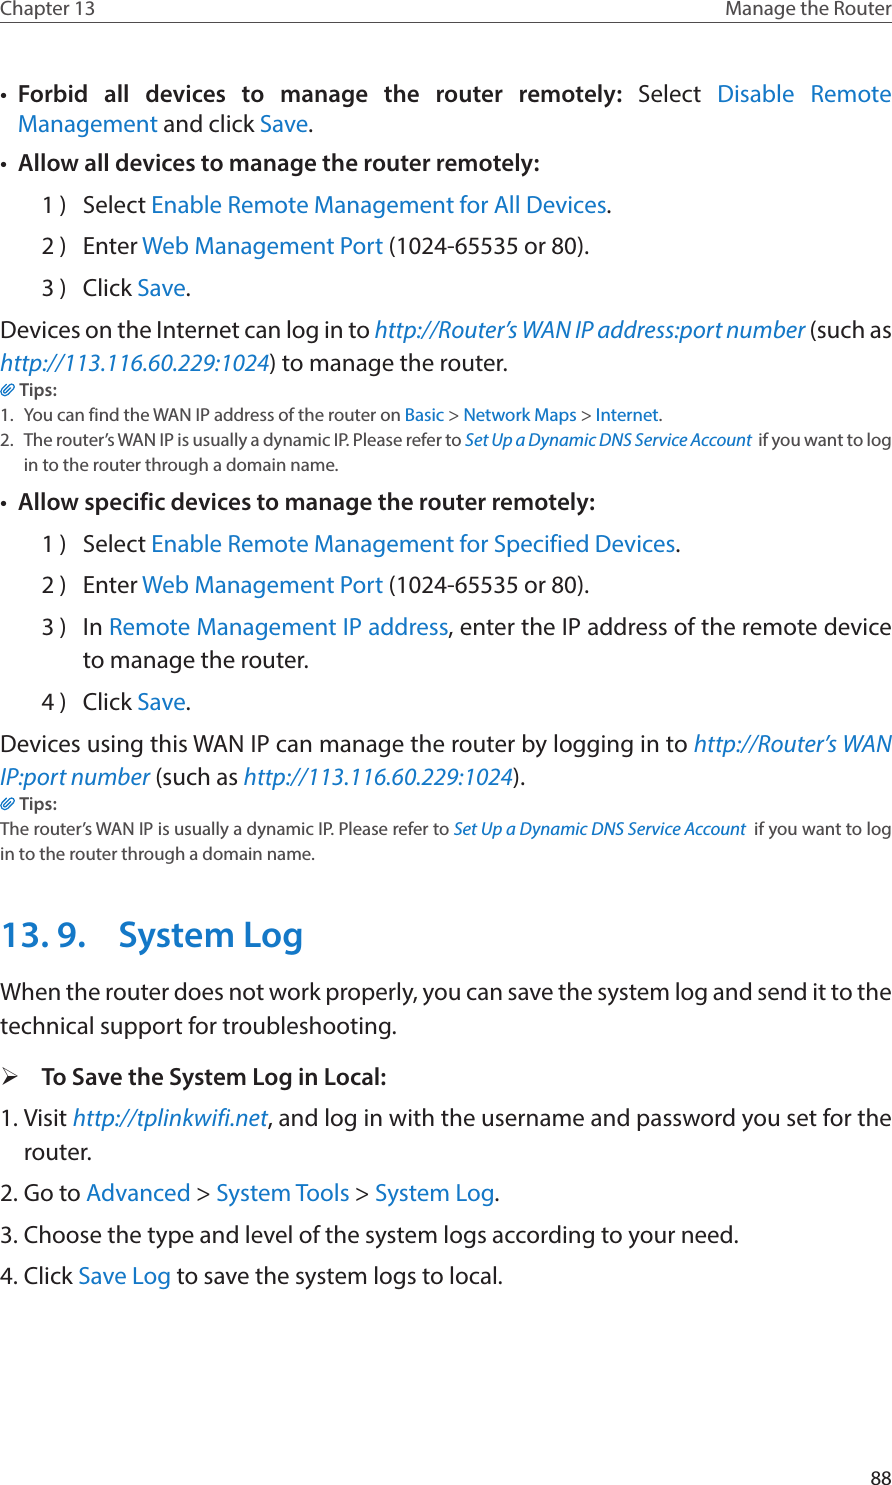 88Chapter 13 Manage the Router •  Forbid all devices to manage the router remotely:  Select  Disable Remote Management and click Save.•  Allow all devices to manage the router remotely:1 )  Select Enable Remote Management for All Devices.2 )  Enter Web Management Port (1024-65535 or 80).3 )  Click Save.Devices on the Internet can log in to http://Router’s WAN IP address:port number (such as http://113.116.60.229:1024) to manage the router.Tips:1.  You can find the WAN IP address of the router on Basic &gt; Network Maps &gt; Internet.2.  The router’s WAN IP is usually a dynamic IP. Please refer to Set Up a Dynamic DNS Service Account  if you want to log in to the router through a domain name.•  Allow specific devices to manage the router remotely:1 )  Select Enable Remote Management for Specified Devices.2 )  Enter Web Management Port (1024-65535 or 80).3 )  In Remote Management IP address, enter the IP address of the remote device to manage the router.4 )  Click Save.Devices using this WAN IP can manage the router by logging in to http://Router’s WAN IP:port number (such as http://113.116.60.229:1024).Tips: The router’s WAN IP is usually a dynamic IP. Please refer to Set Up a Dynamic DNS Service Account  if you want to log in to the router through a domain name.13. 9.  System LogWhen the router does not work properly, you can save the system log and send it to the technical support for troubleshooting. ¾To Save the System Log in Local:1. Visit http://tplinkwifi.net, and log in with the username and password you set for the router.2. Go to Advanced &gt; System Tools &gt; System Log.3. Choose the type and level of the system logs according to your need.4. Click Save Log to save the system logs to local.